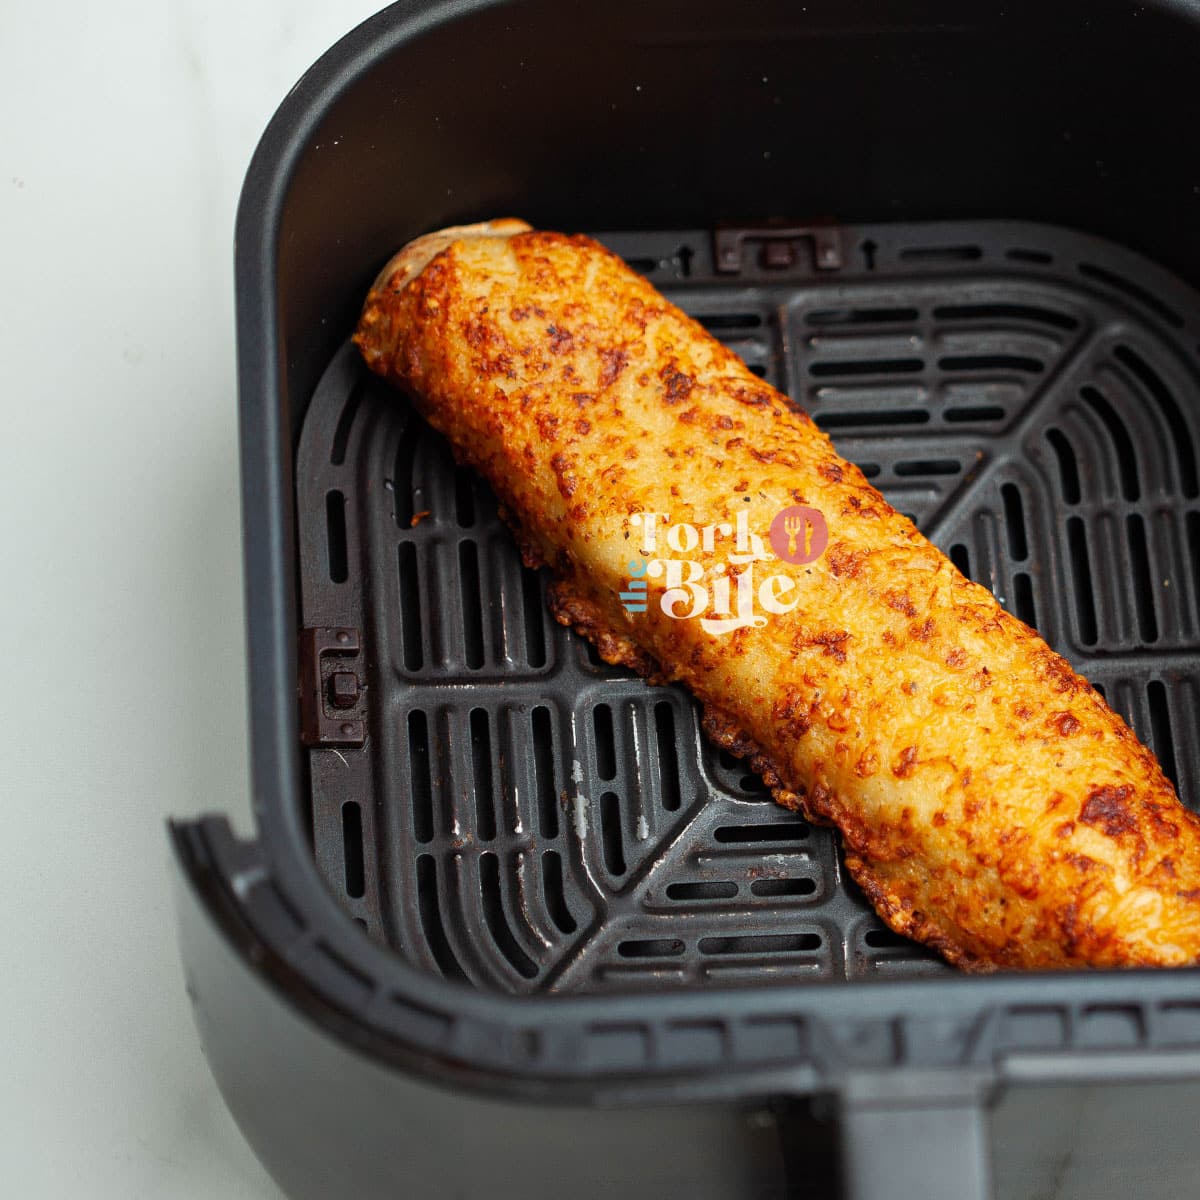 The air fryer is the best method for reheating Costco chicken bakes, as it helps retain the crust's crispiness while warming the filling evenly.